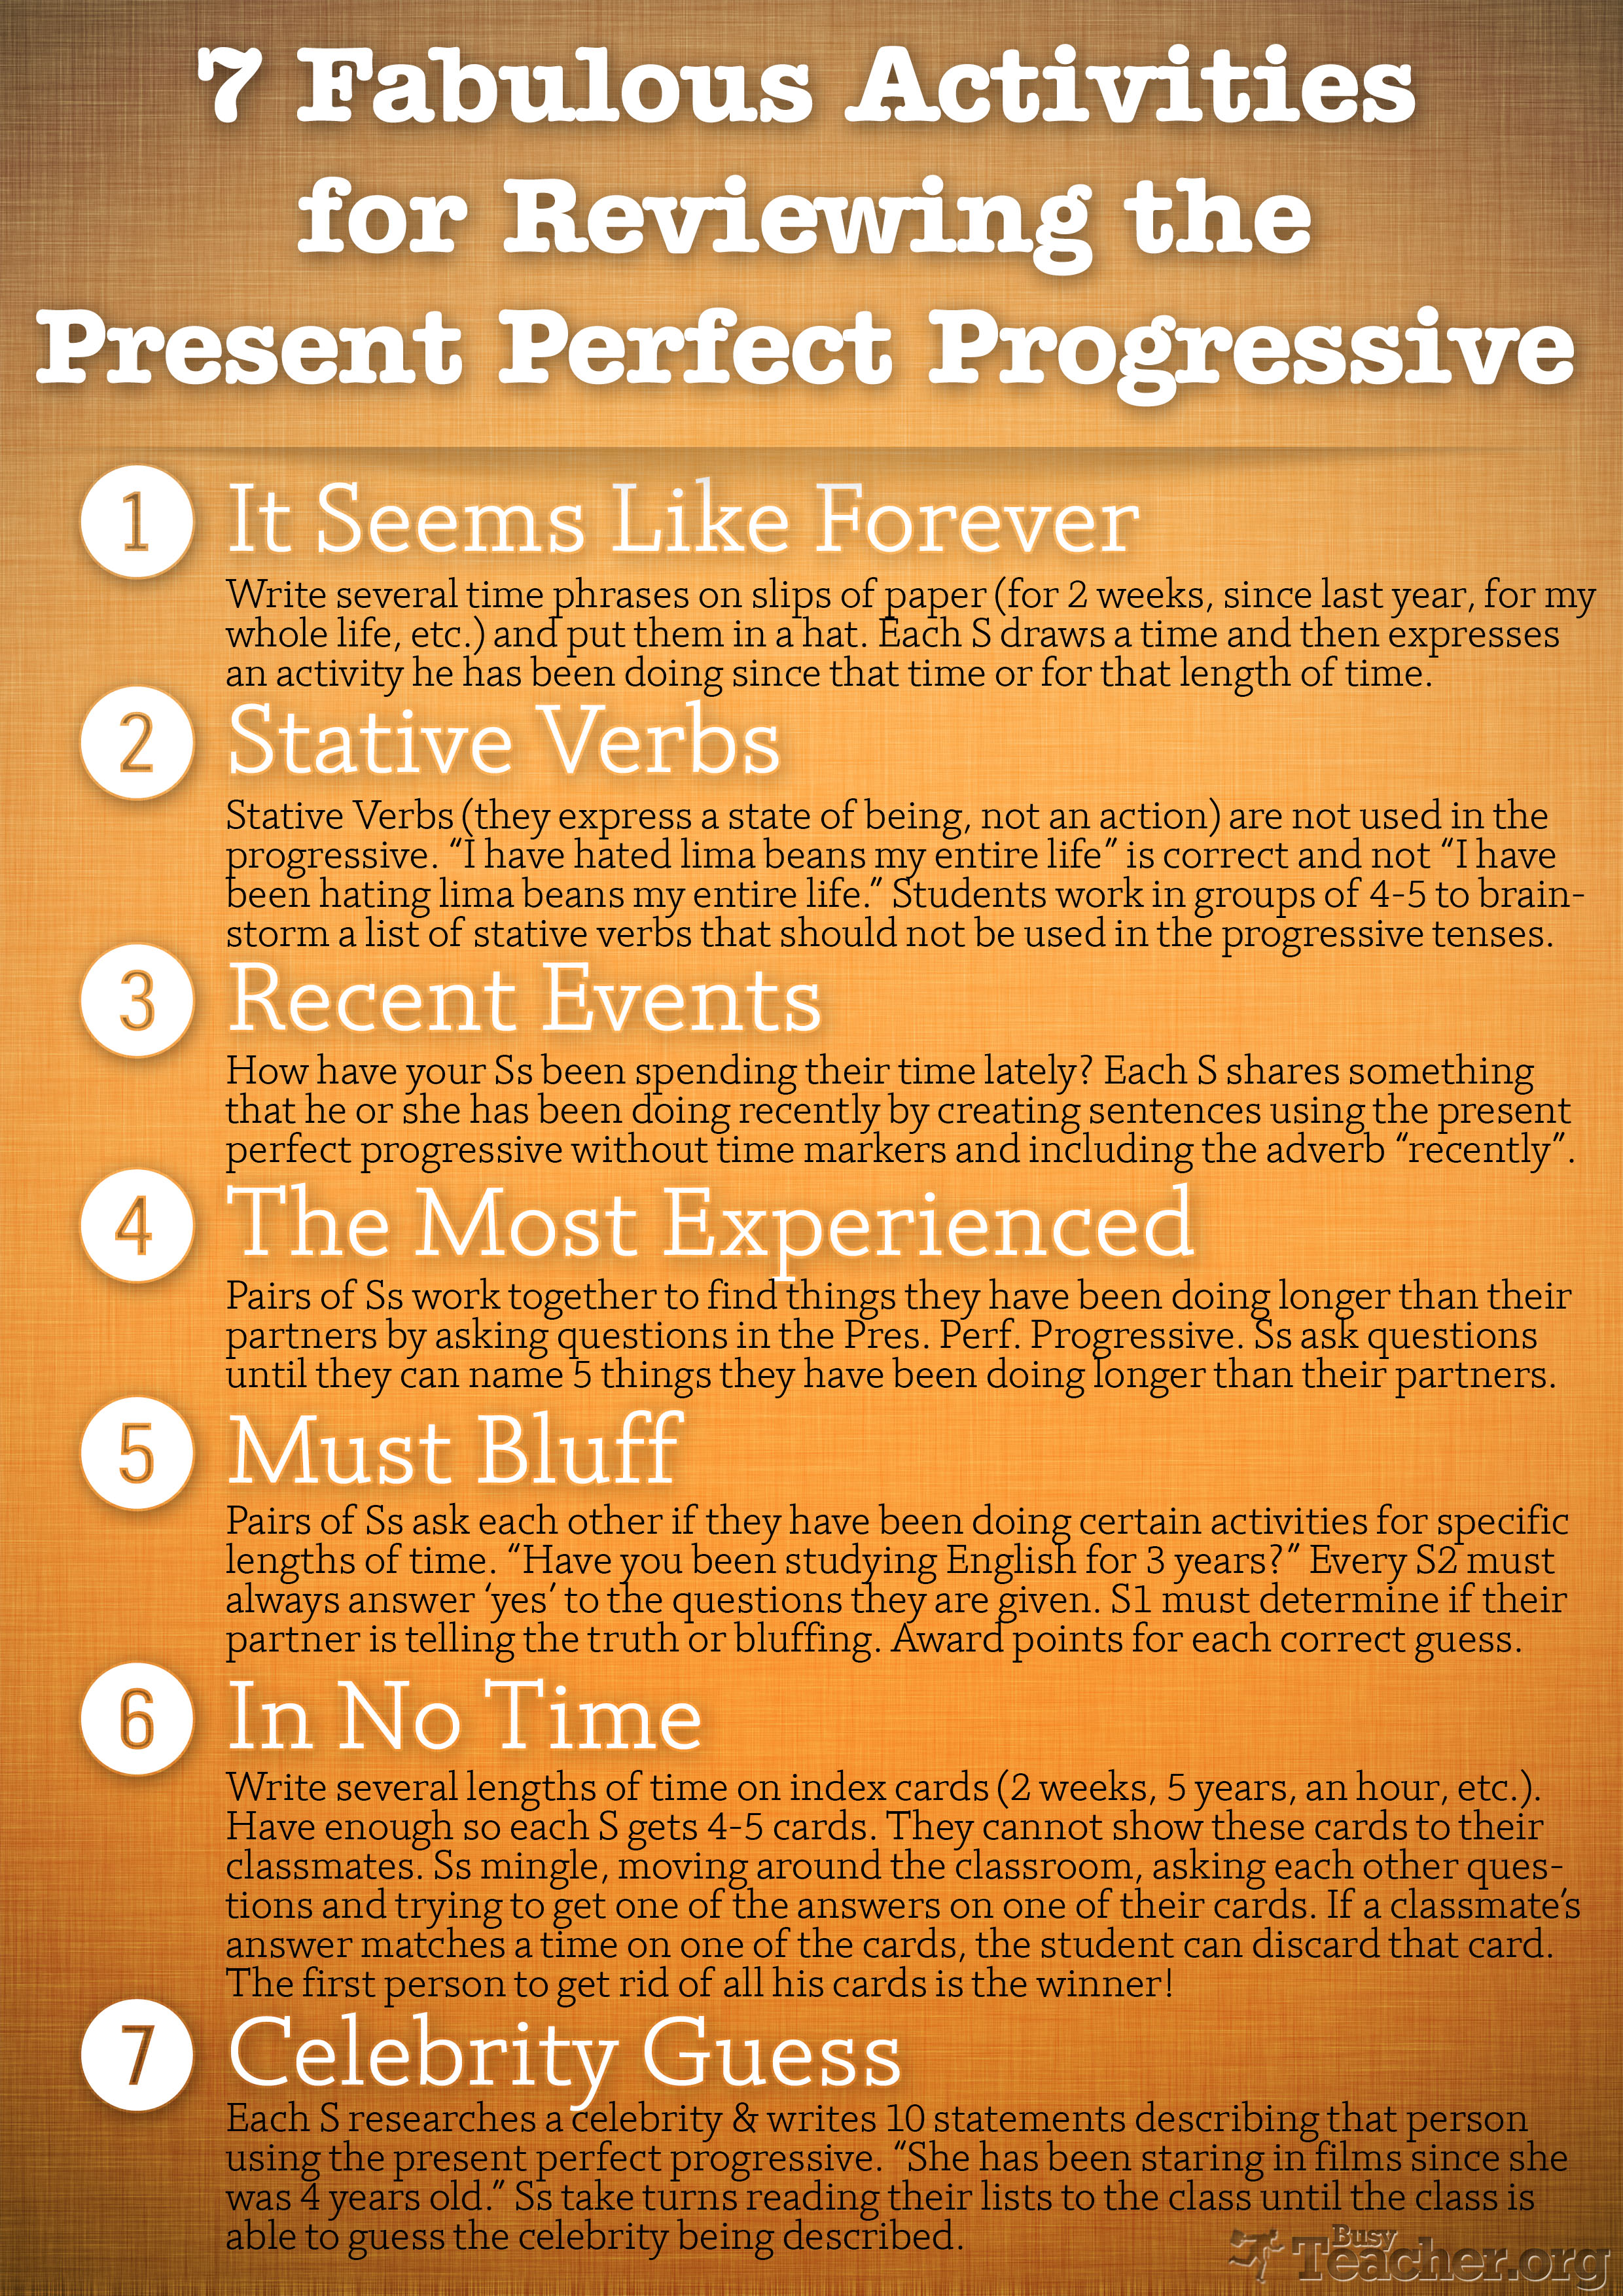 Omkreds Diskriminere delikat 7 Fabulous Activities to Review the Present Perfect Progressive: Poster